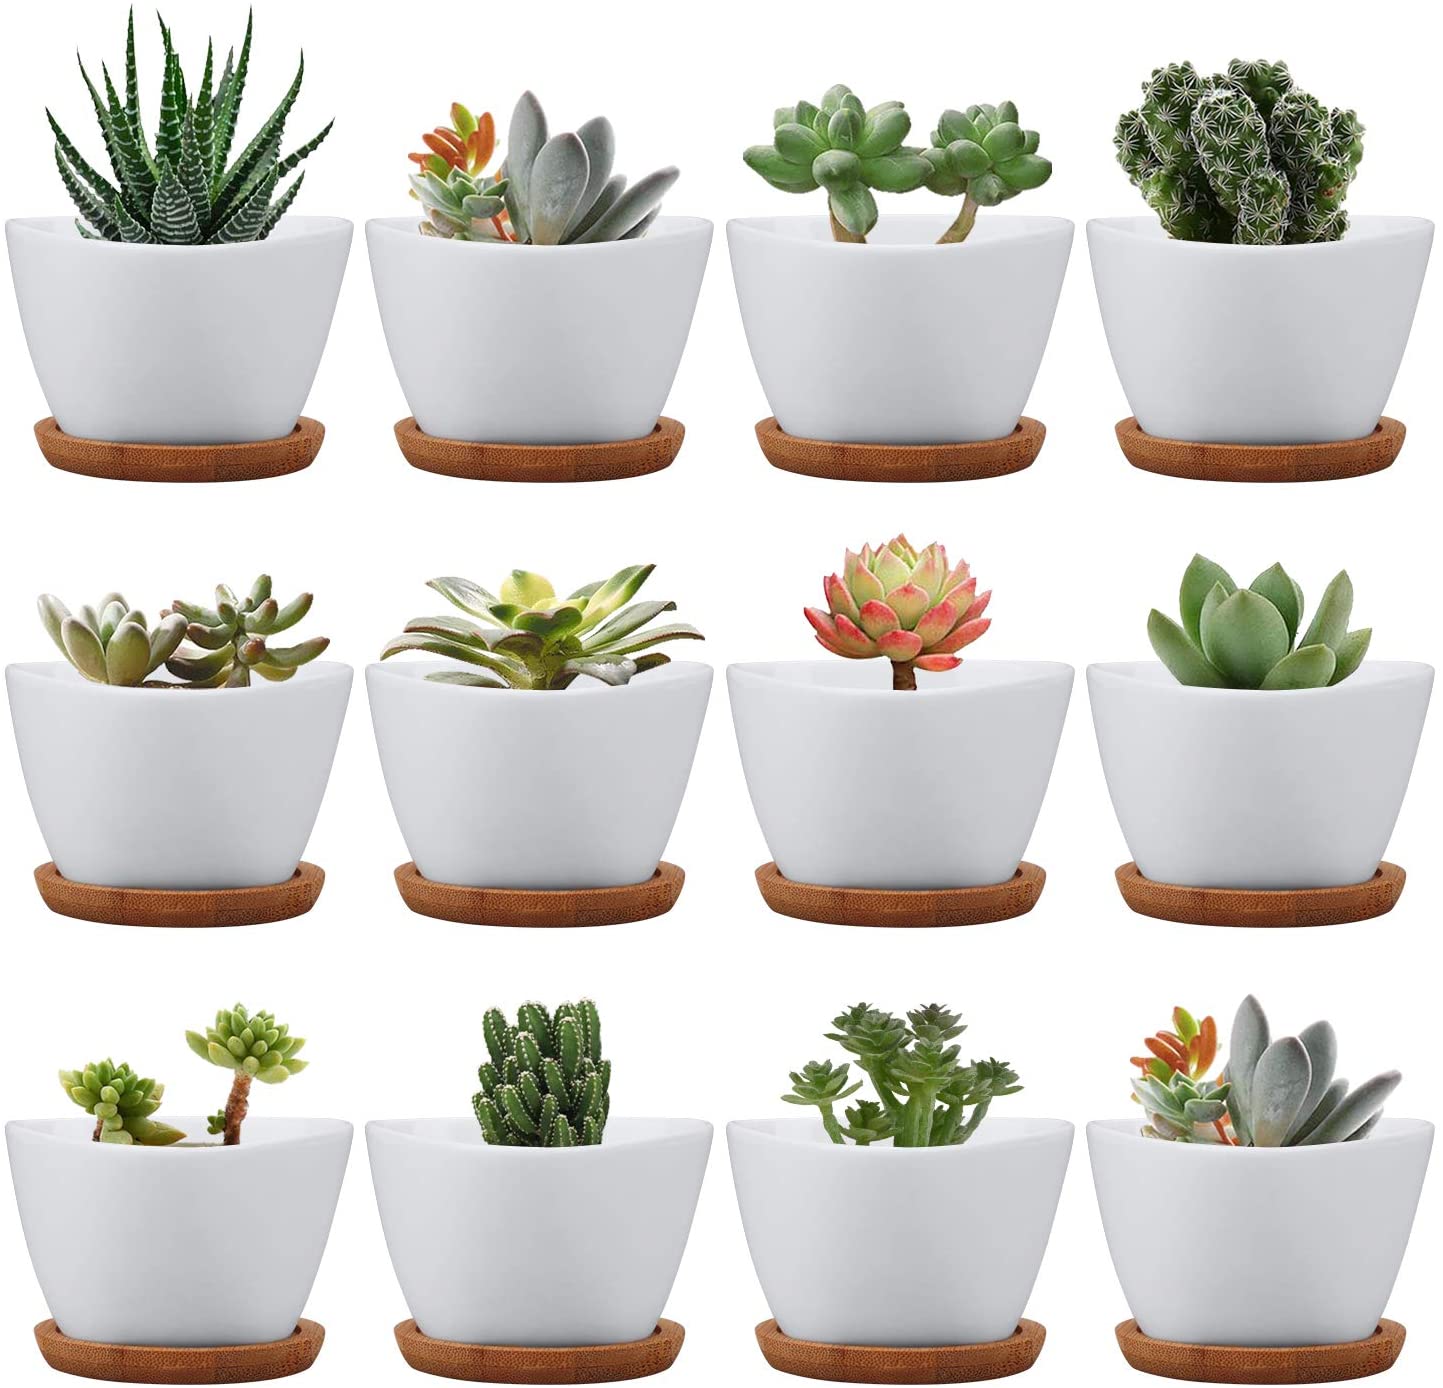 12 different example plants potted in the brajtt succulent pots